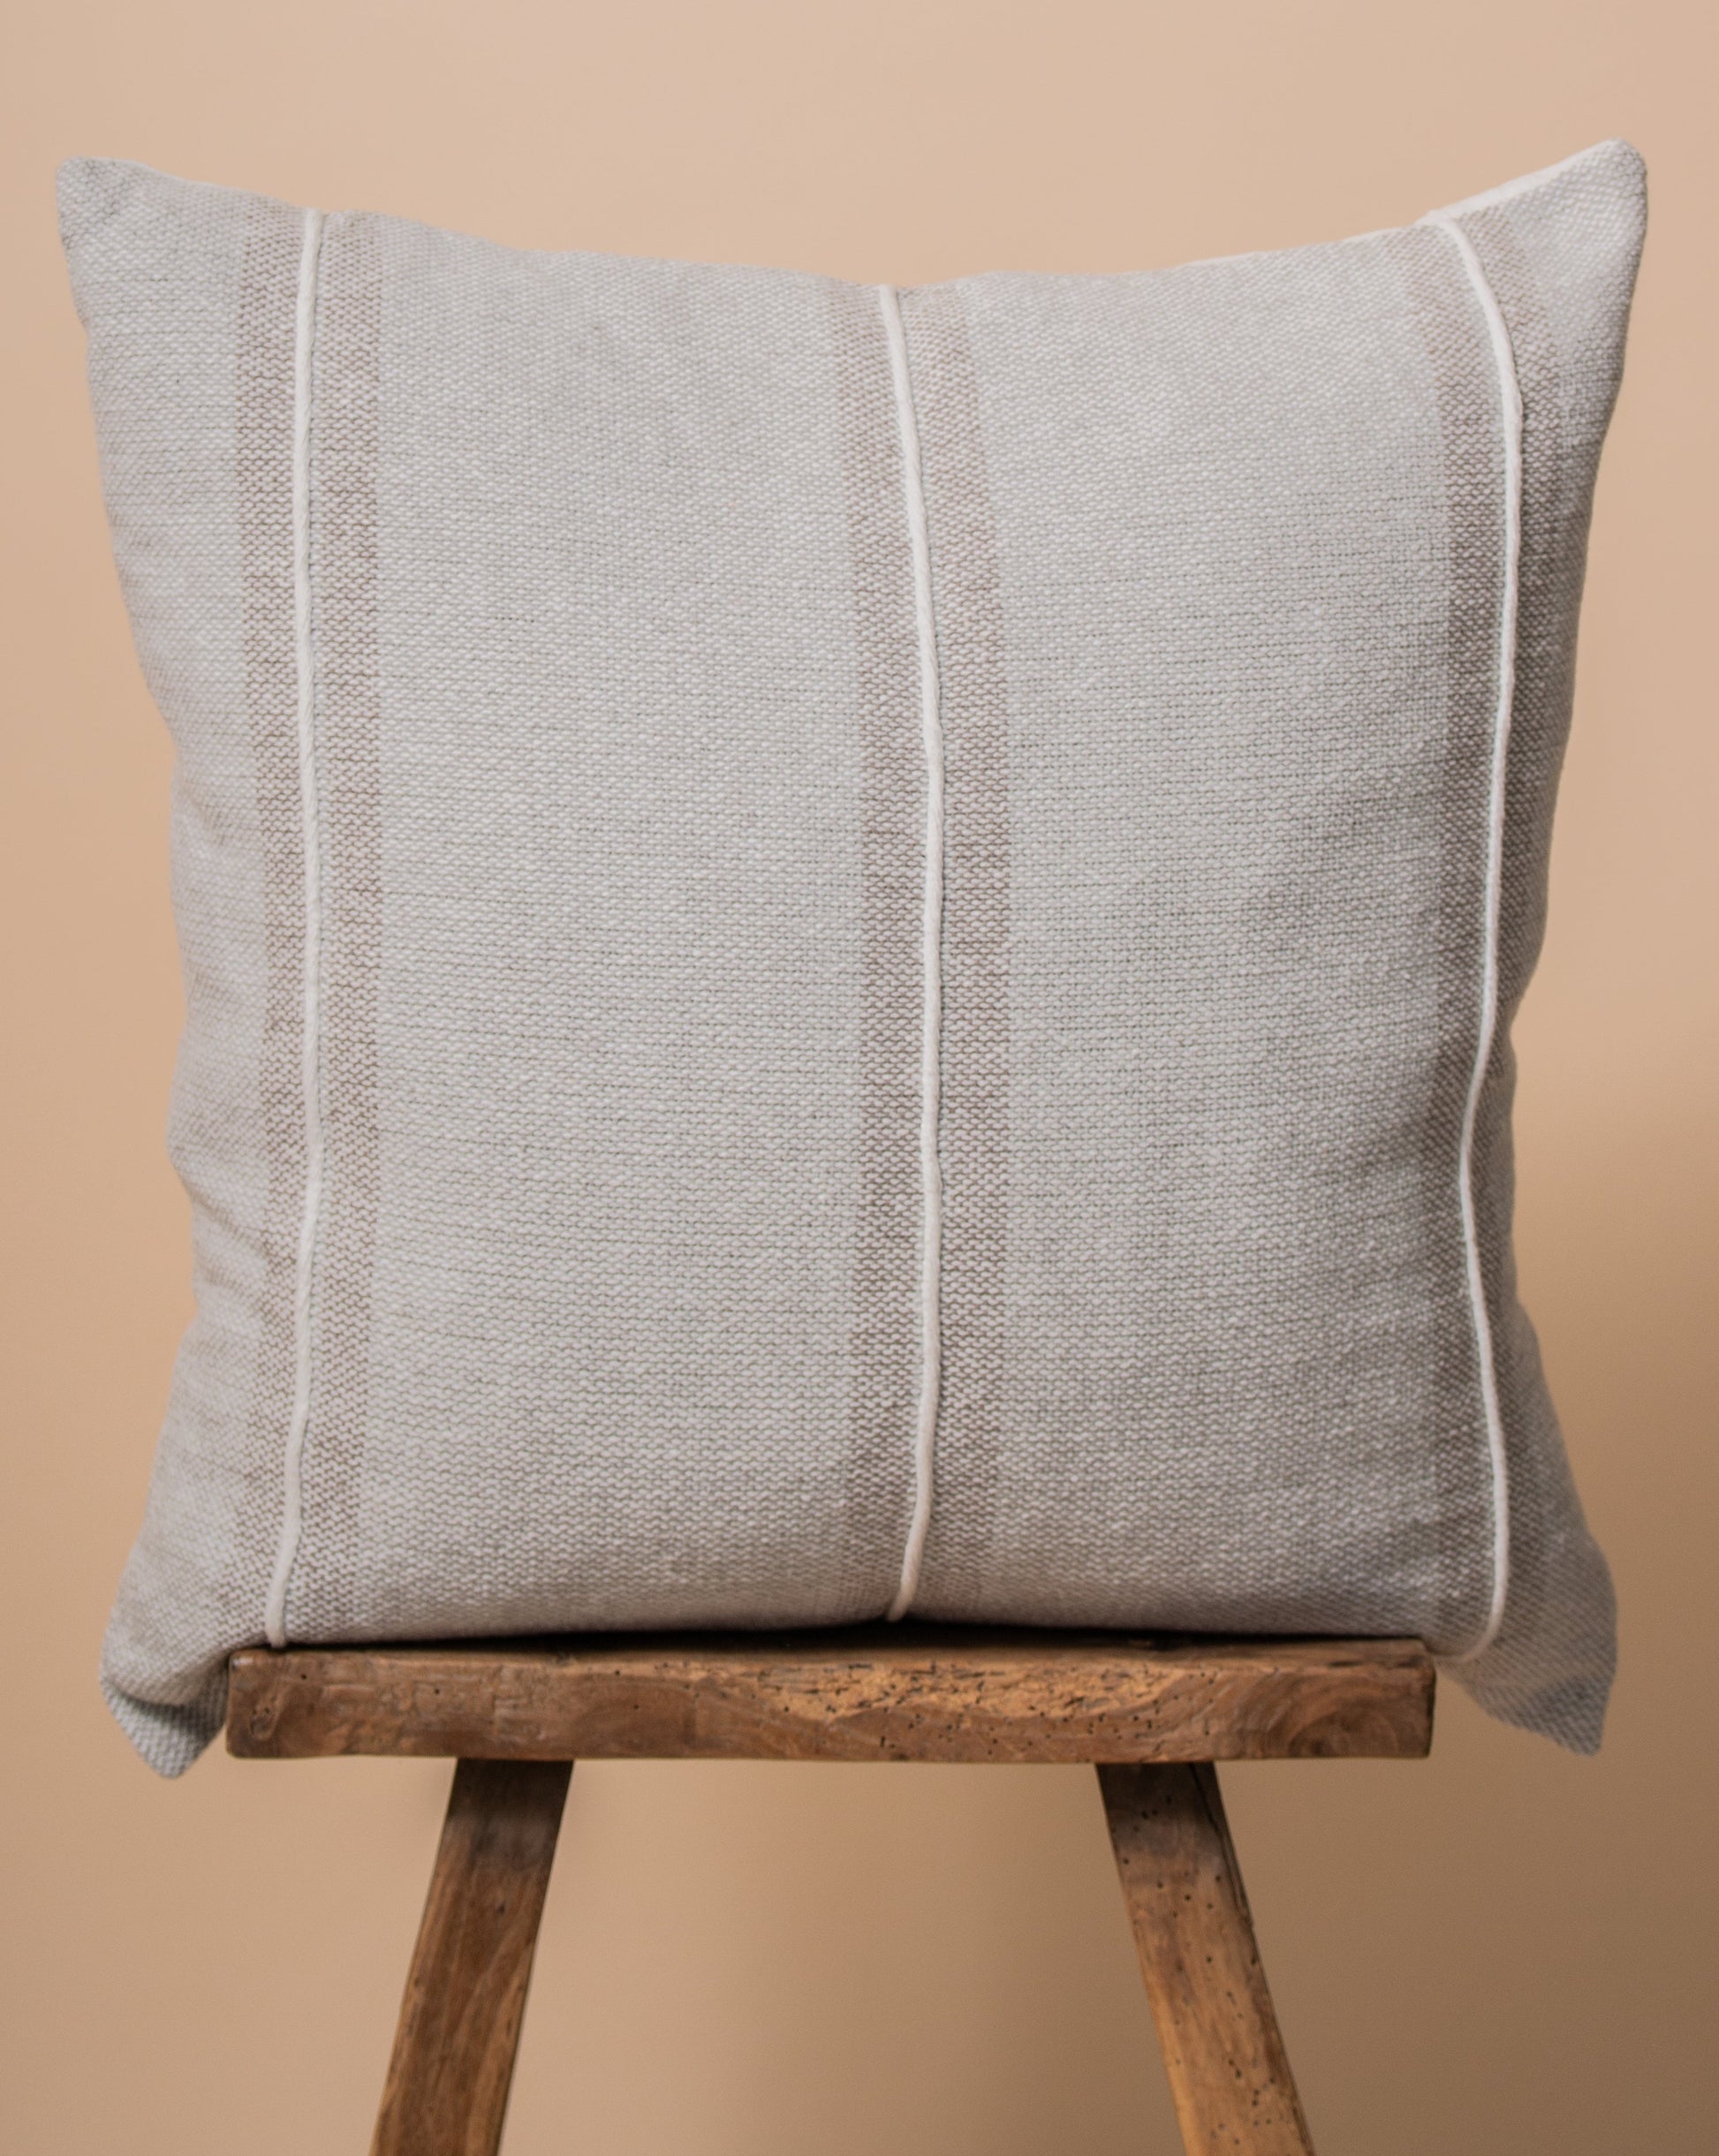 Harlow Striped Textured Pillow Cover Grey